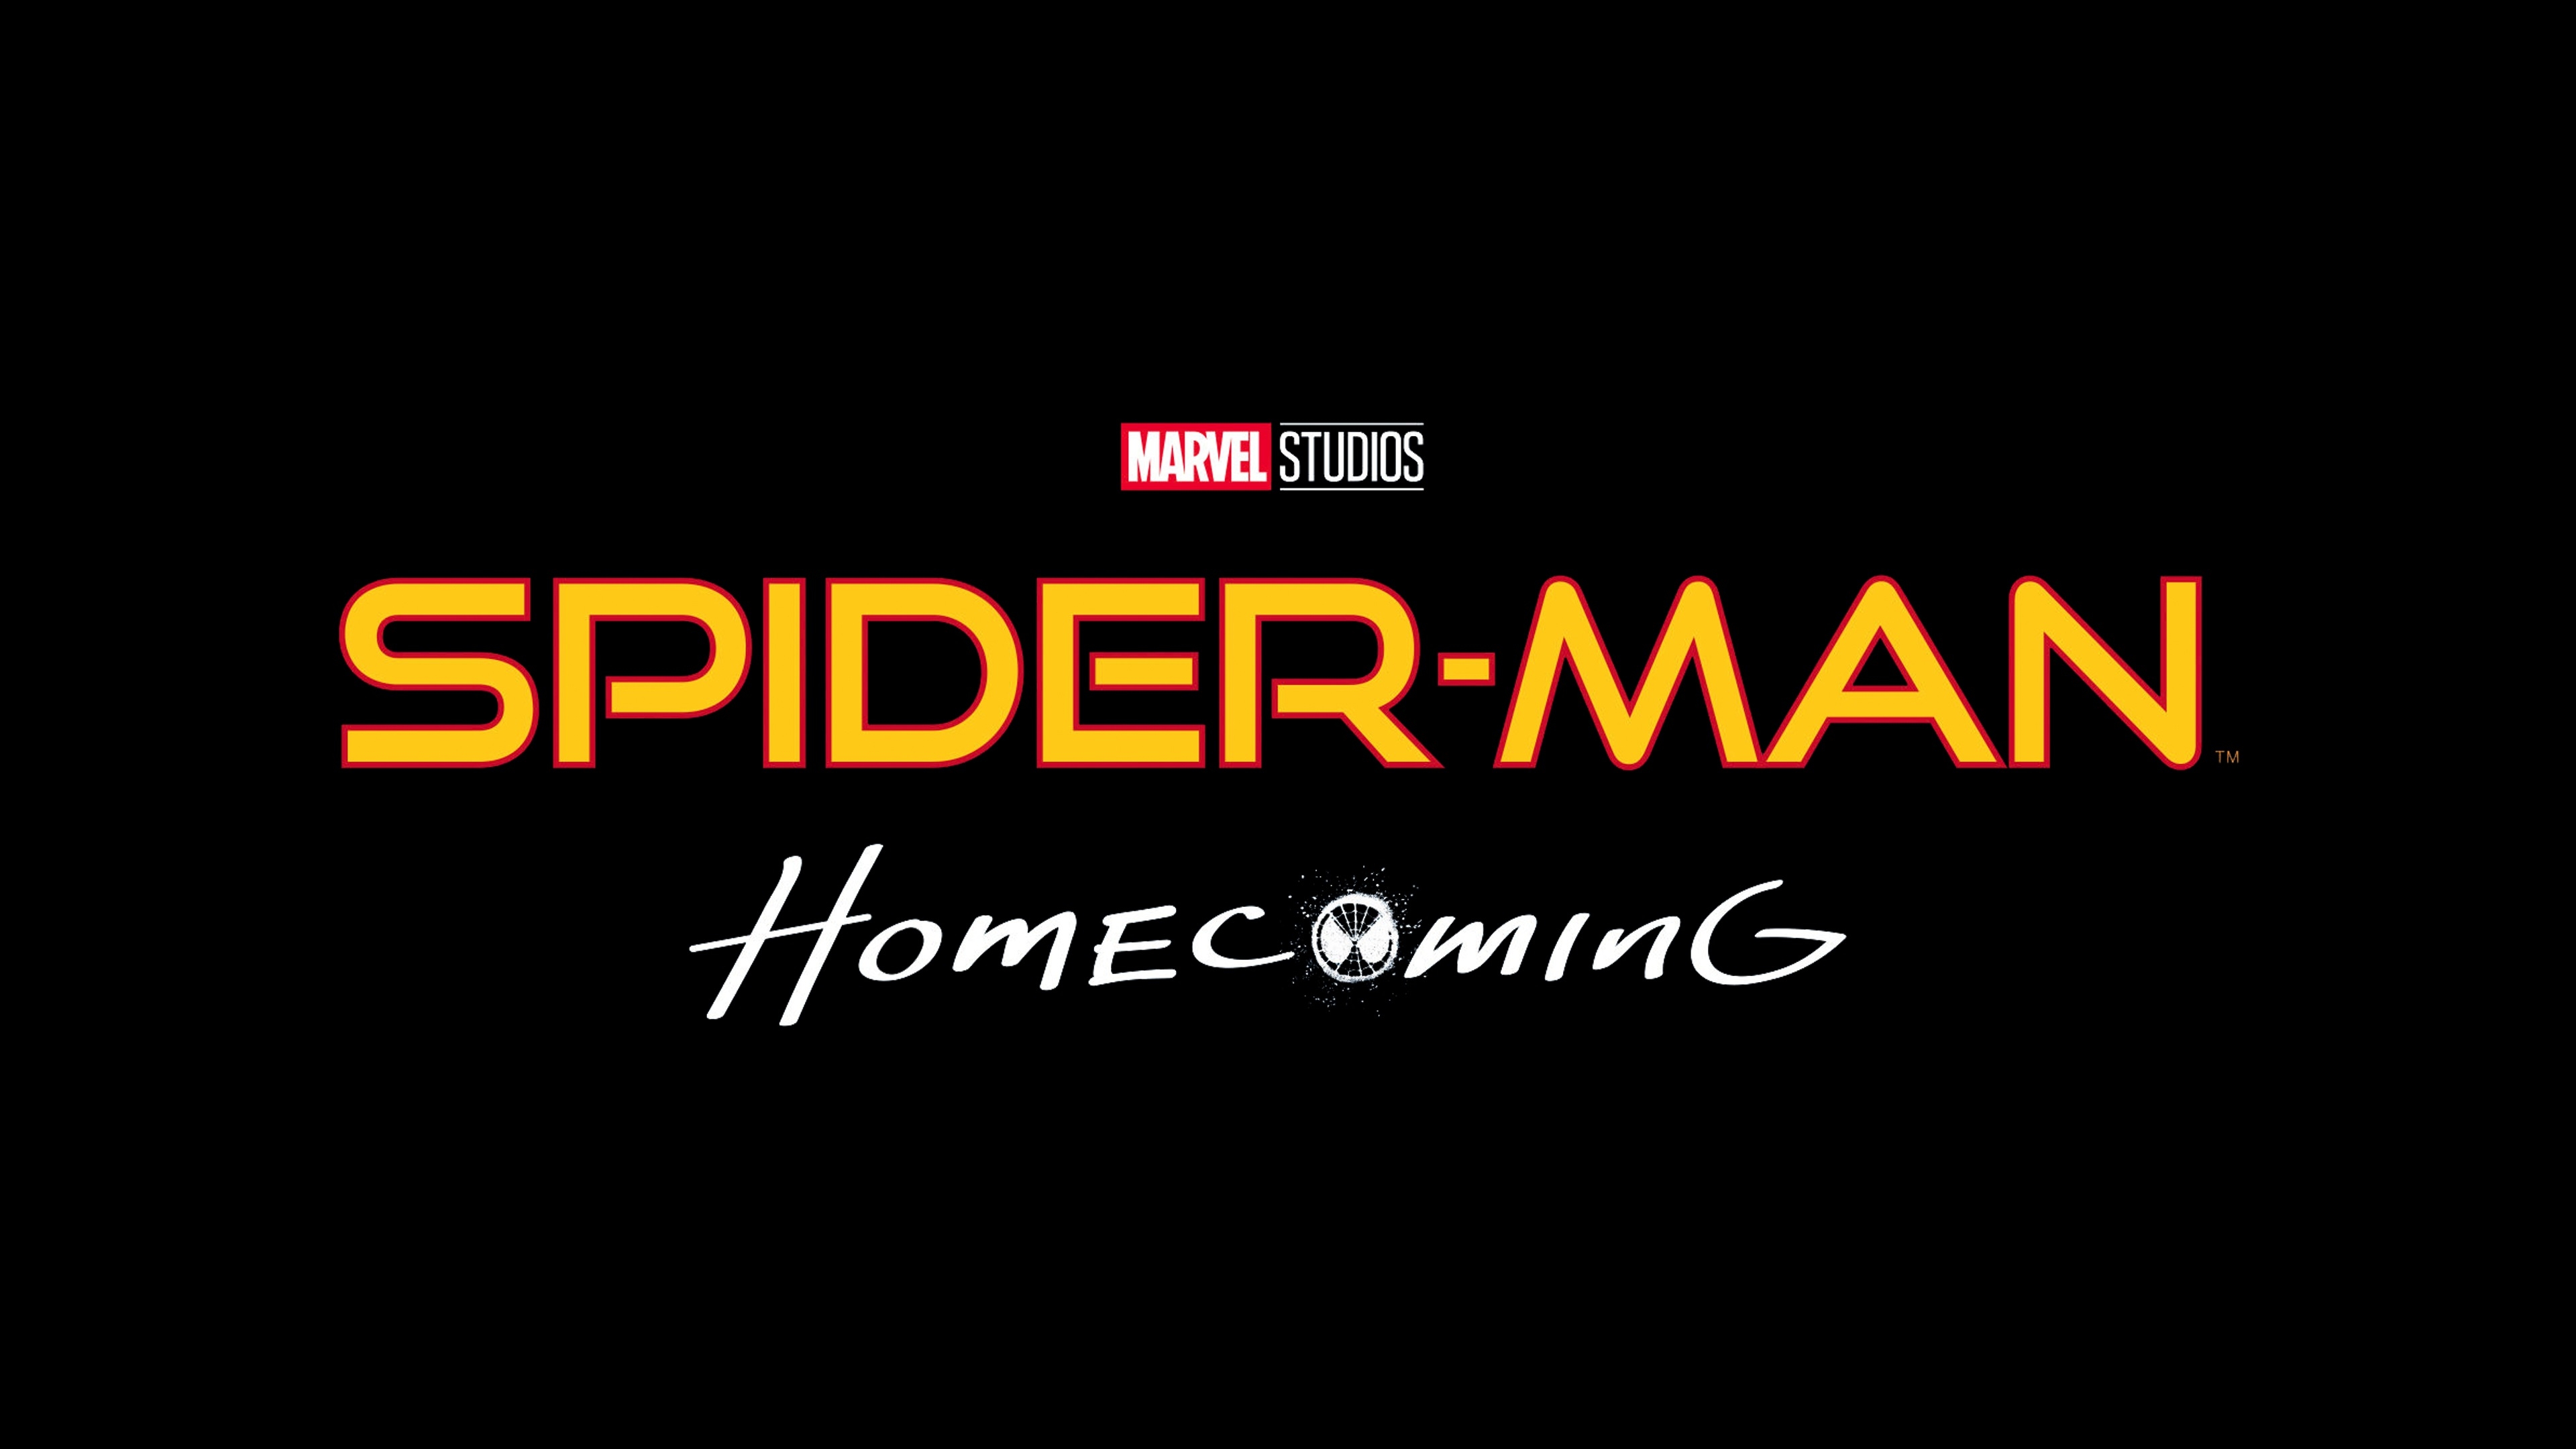 Spiderman Homecoming 2017 for 3840 x 2160 4K Ultra HDTV resolution